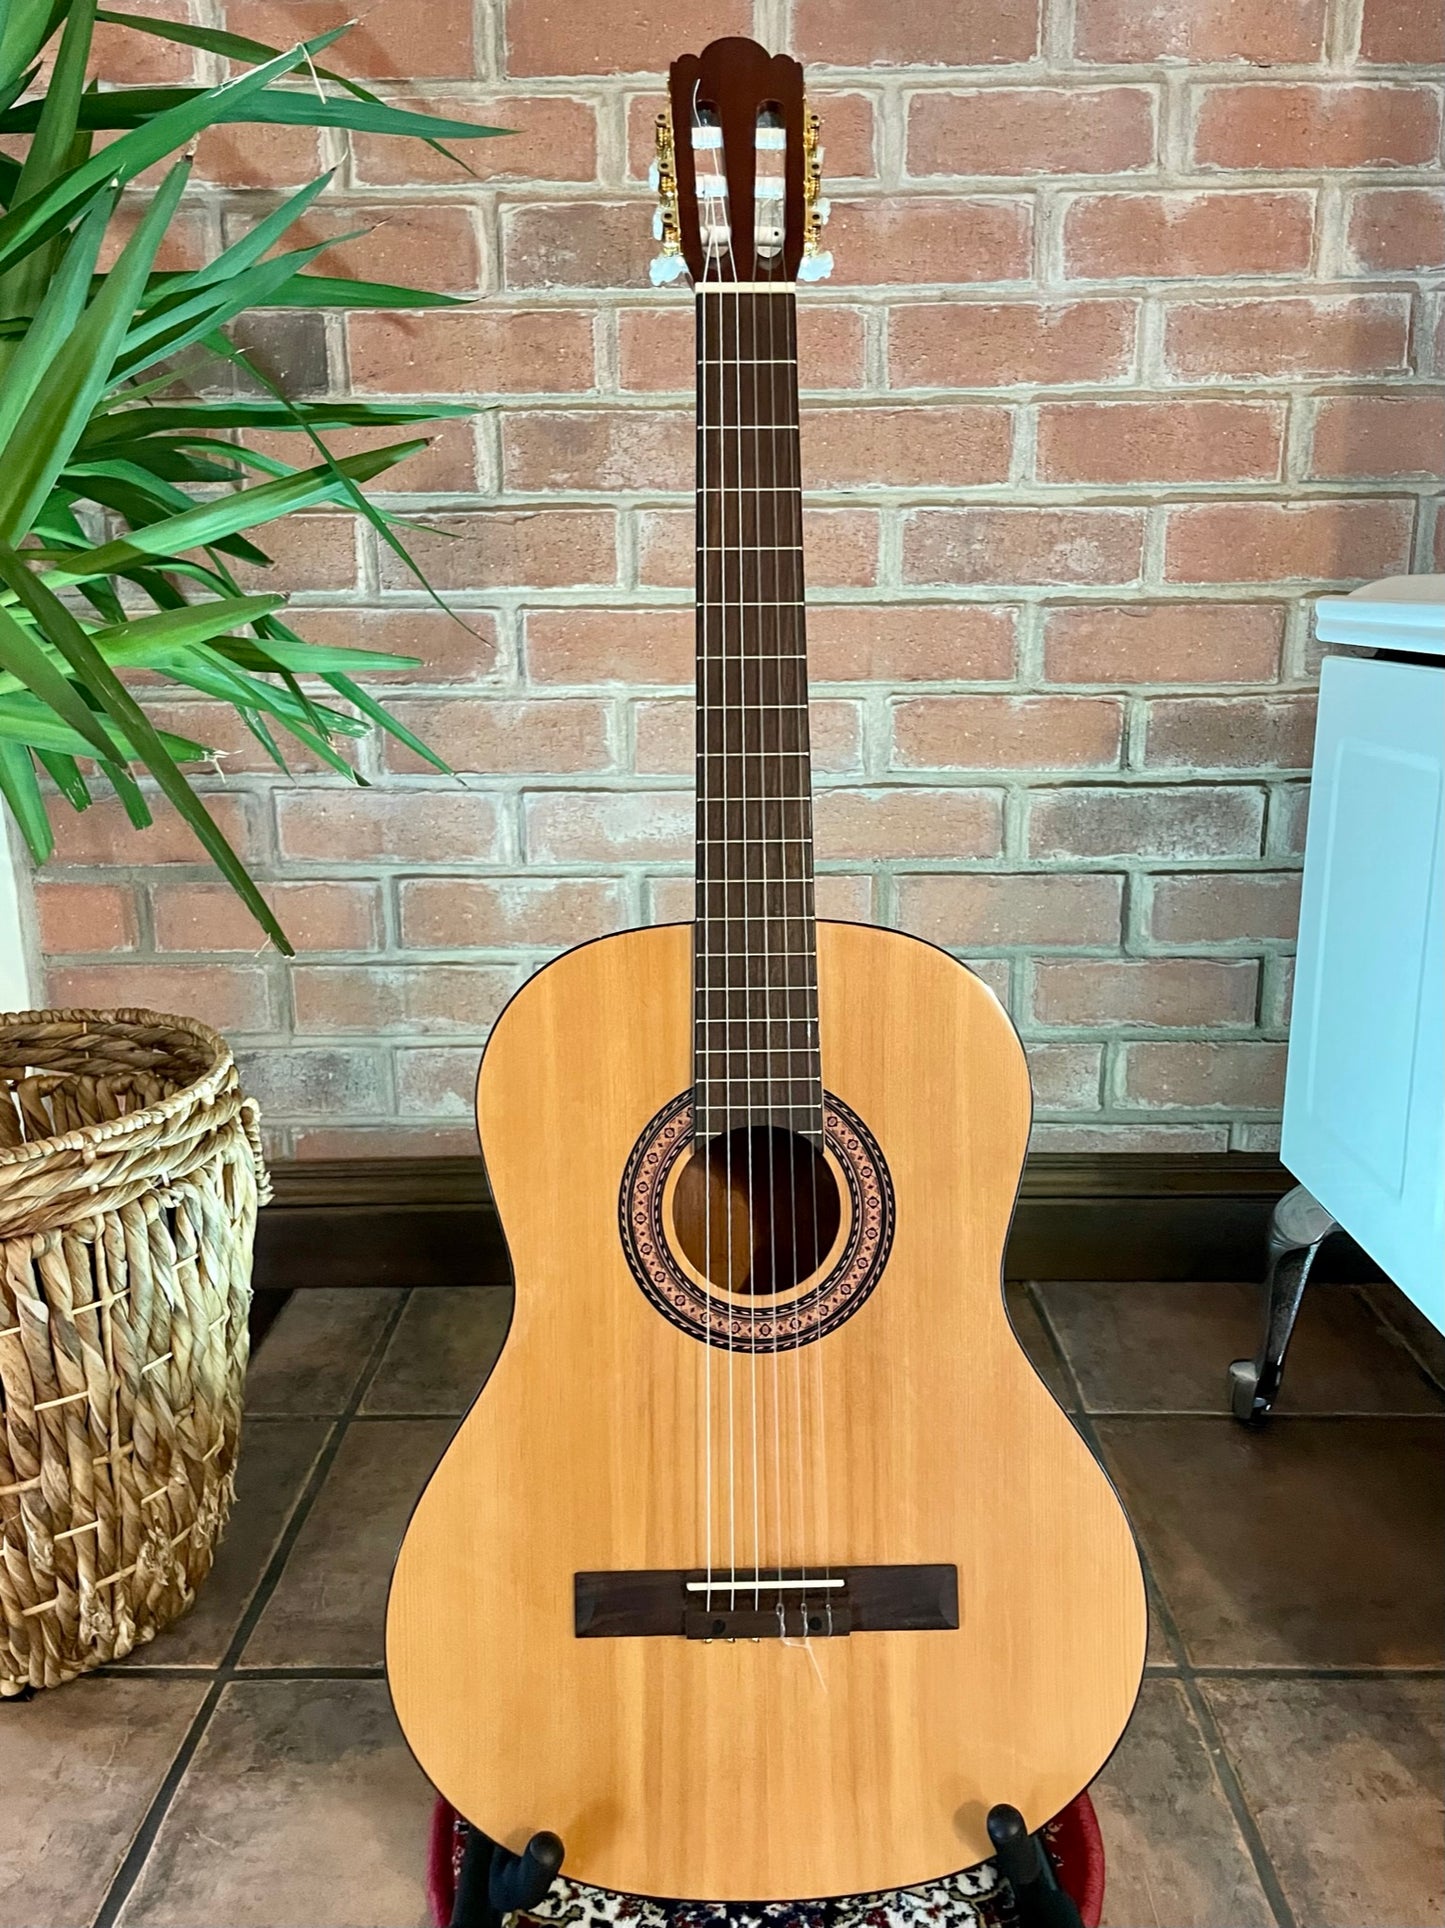 Spanish Classical Guitar - Unknow brand, Solid Top